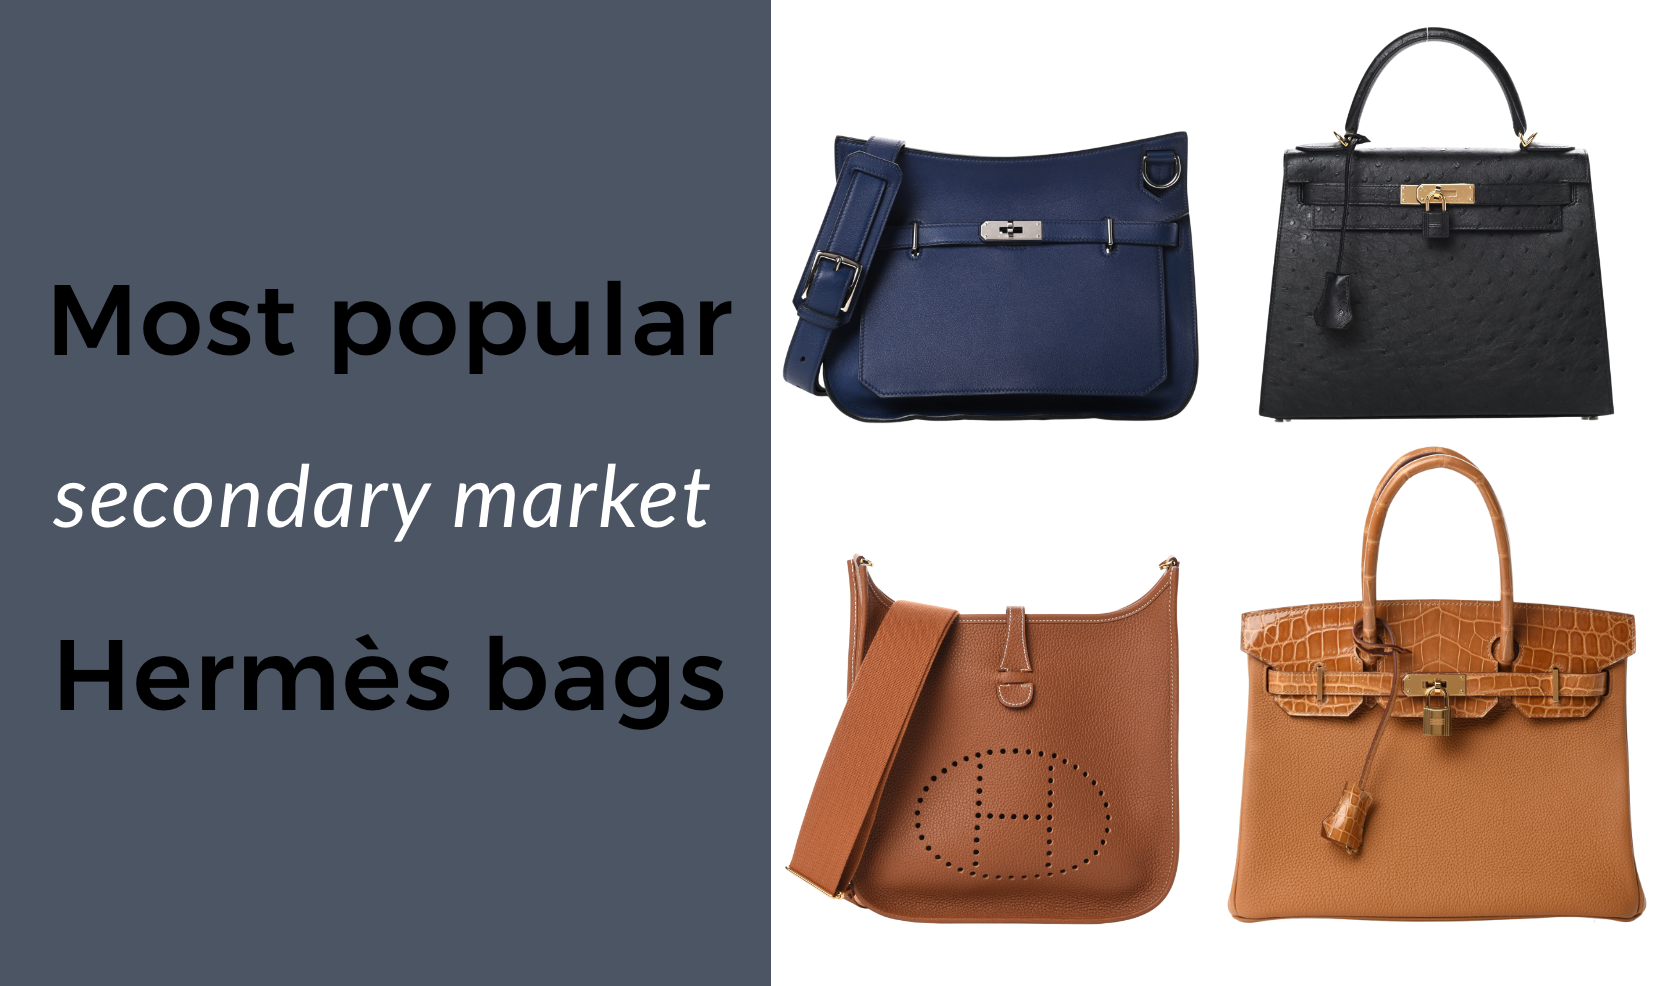 Most popular Hermès bags on the secondary market